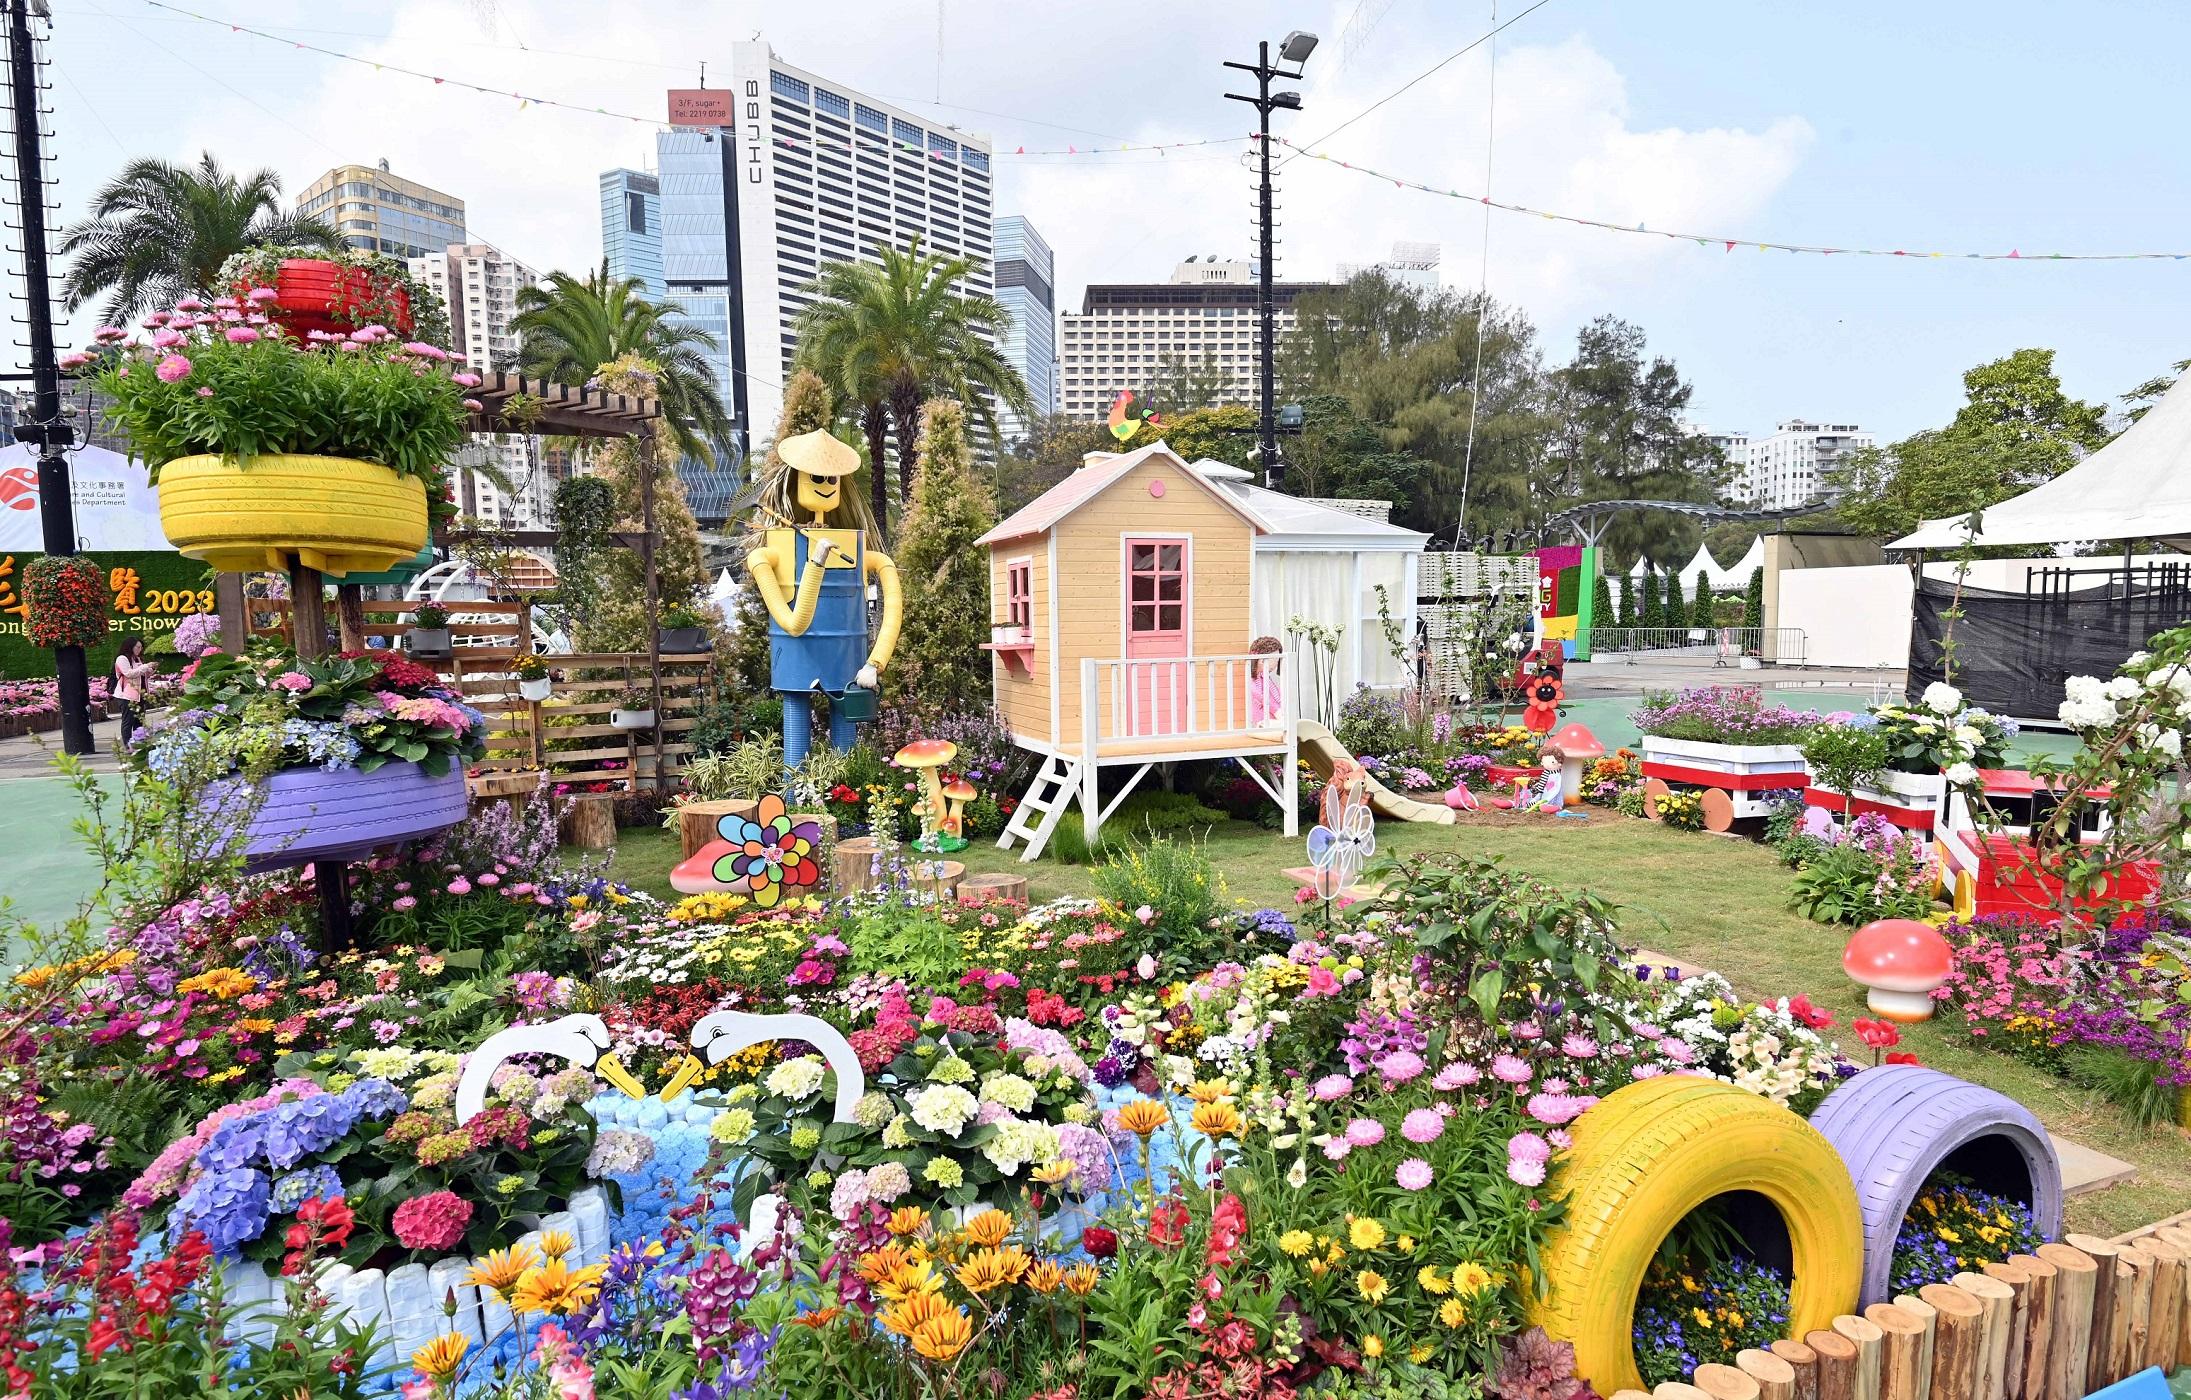 The Hong Kong Flower Show 2023 (HKFS) is currently running at Victoria Park. The winning entries of the Oriental Style Garden Plot Competition and Western Style Garden Plot Competition, one of the HKFS's activities, are also on display at the showground. Photo shows Southern District's "A Happy Playground", which is the winner of the Environmental Award for a Western Style Garden.